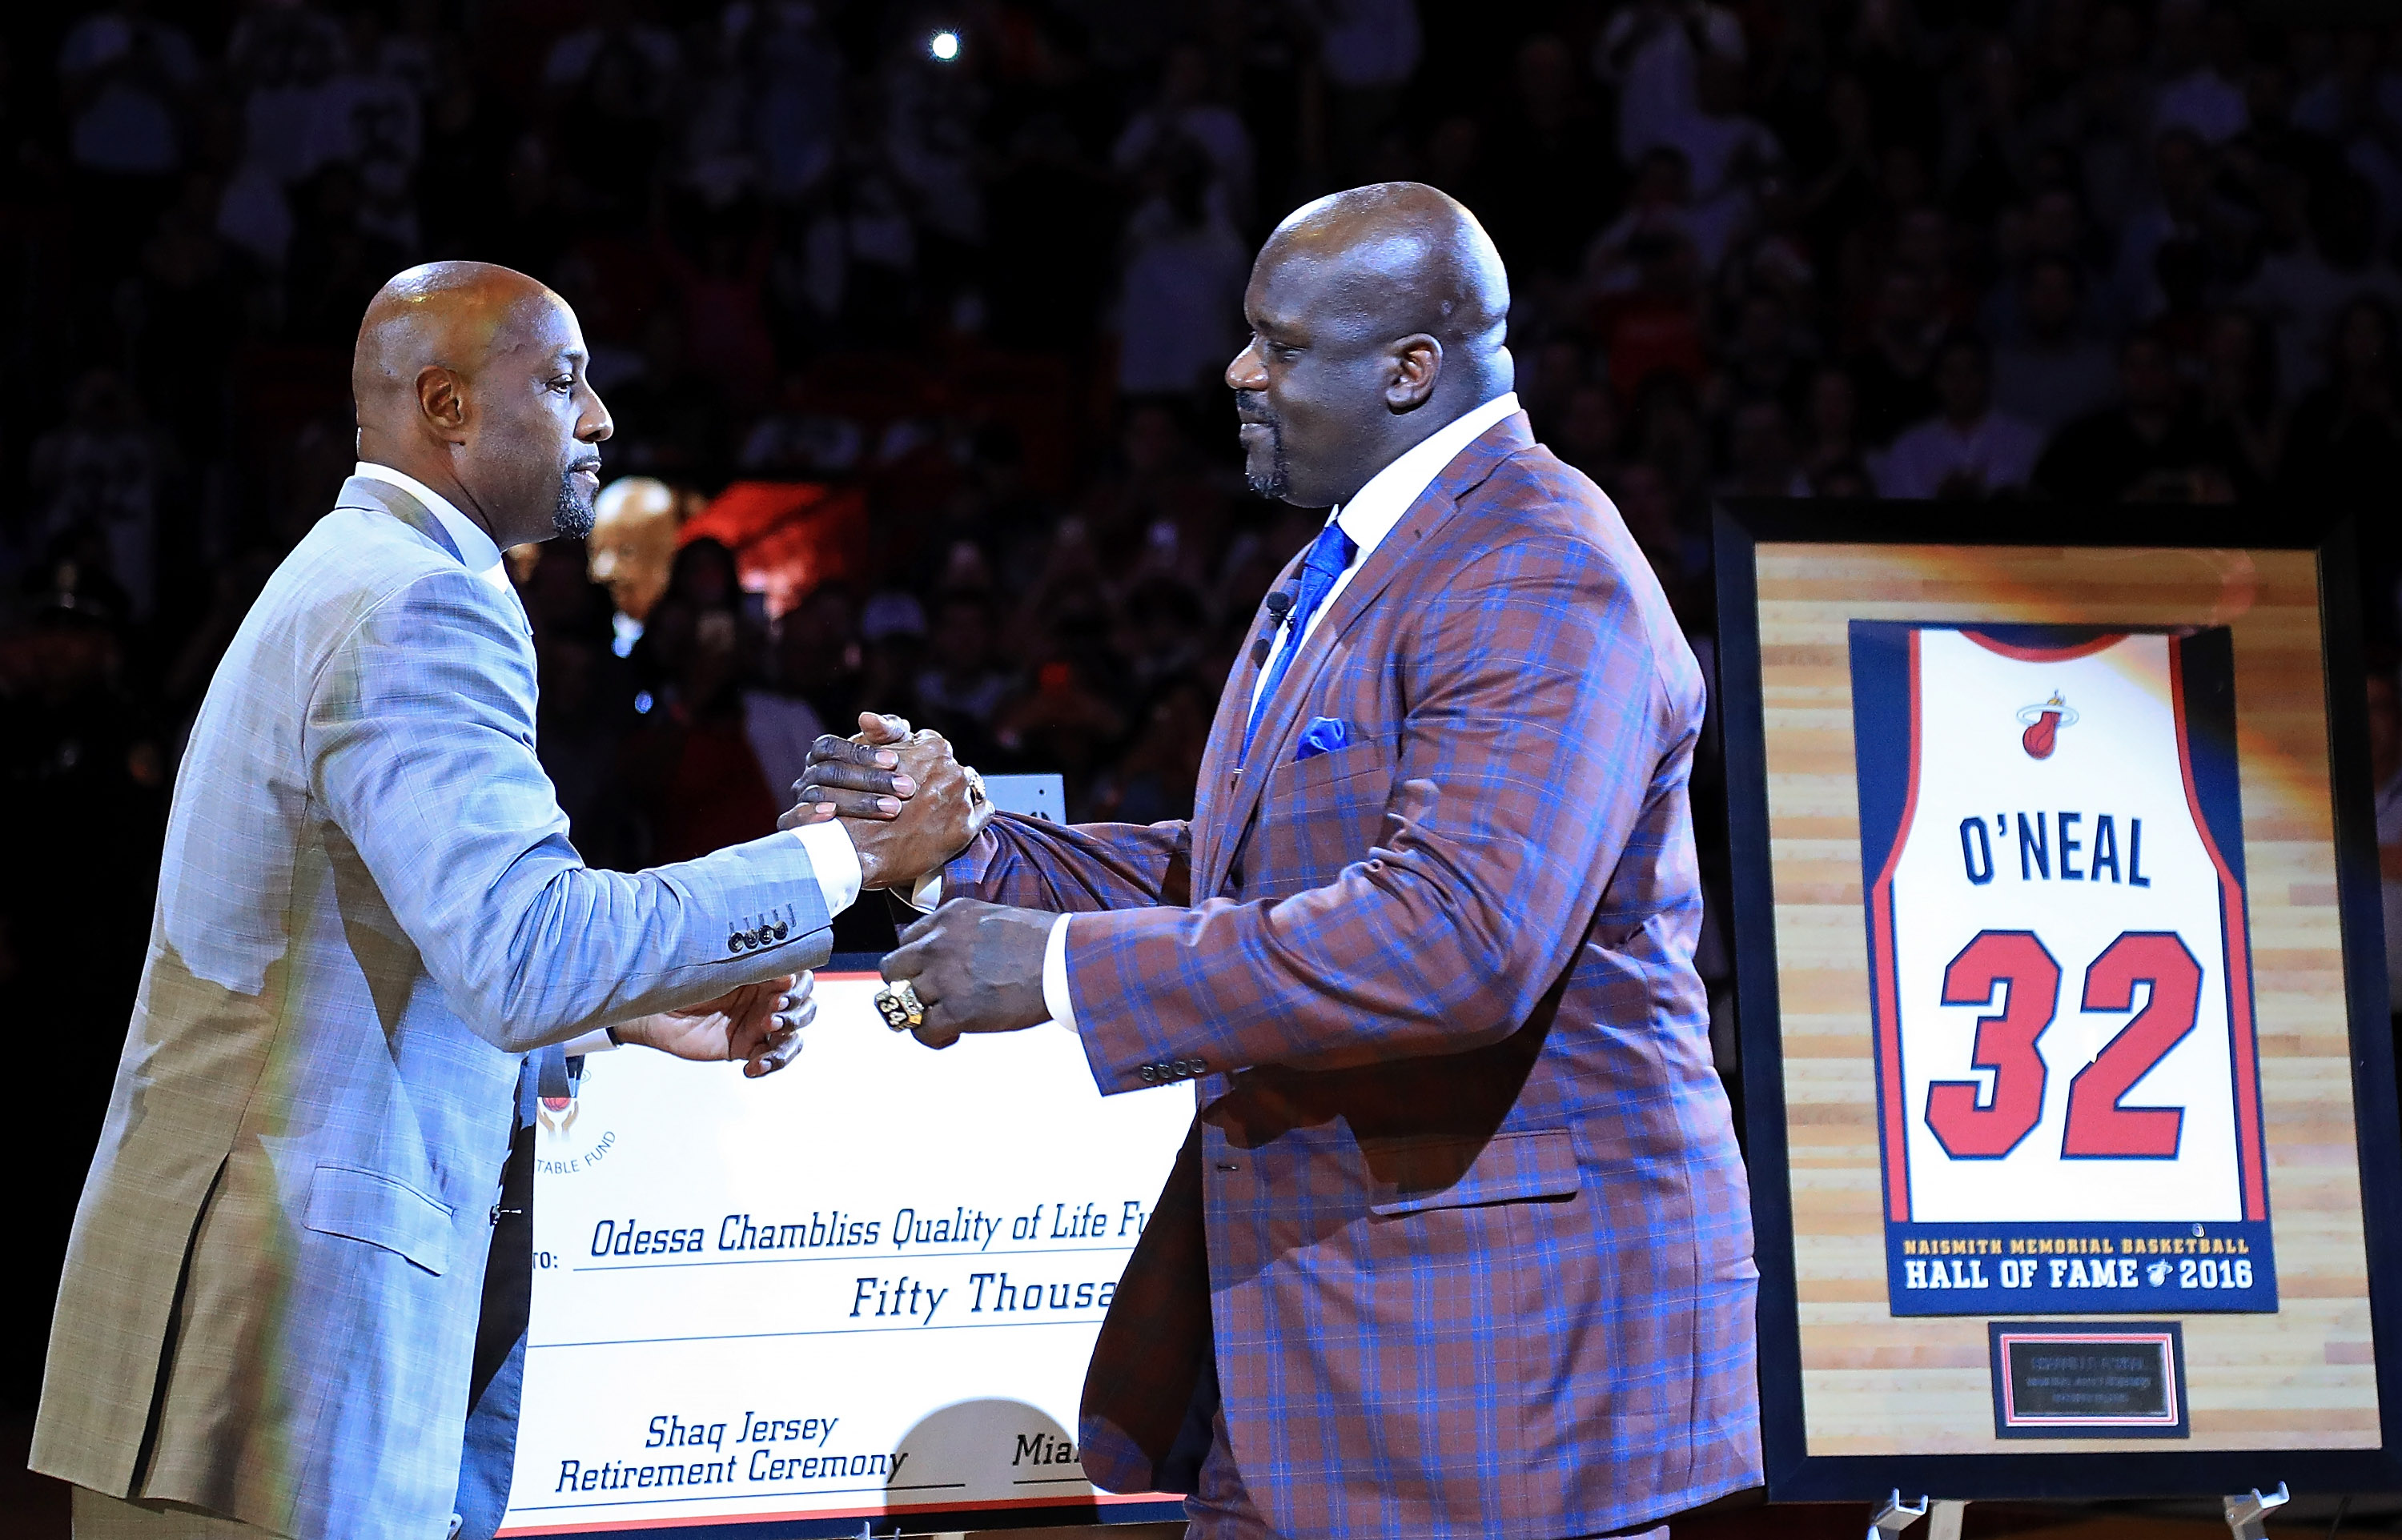 MIAMI, FL - DECEMBER 22: Former teammate Alonzo Mourning speaks during a ceremony to honor Shaquille O'Neal as he has his number retired during a game between the Miami Heat and the Los Angeles Lakers at American Airlines Arena on December 22, 2016 in Miami, Florida. NOTE TO USER: User expressly acknowledges and agrees that, by downloading and or using this photograph, User is consenting to the terms and conditions of the Getty Images License Agreement.   Mike Ehrmann/Getty Images/AFP